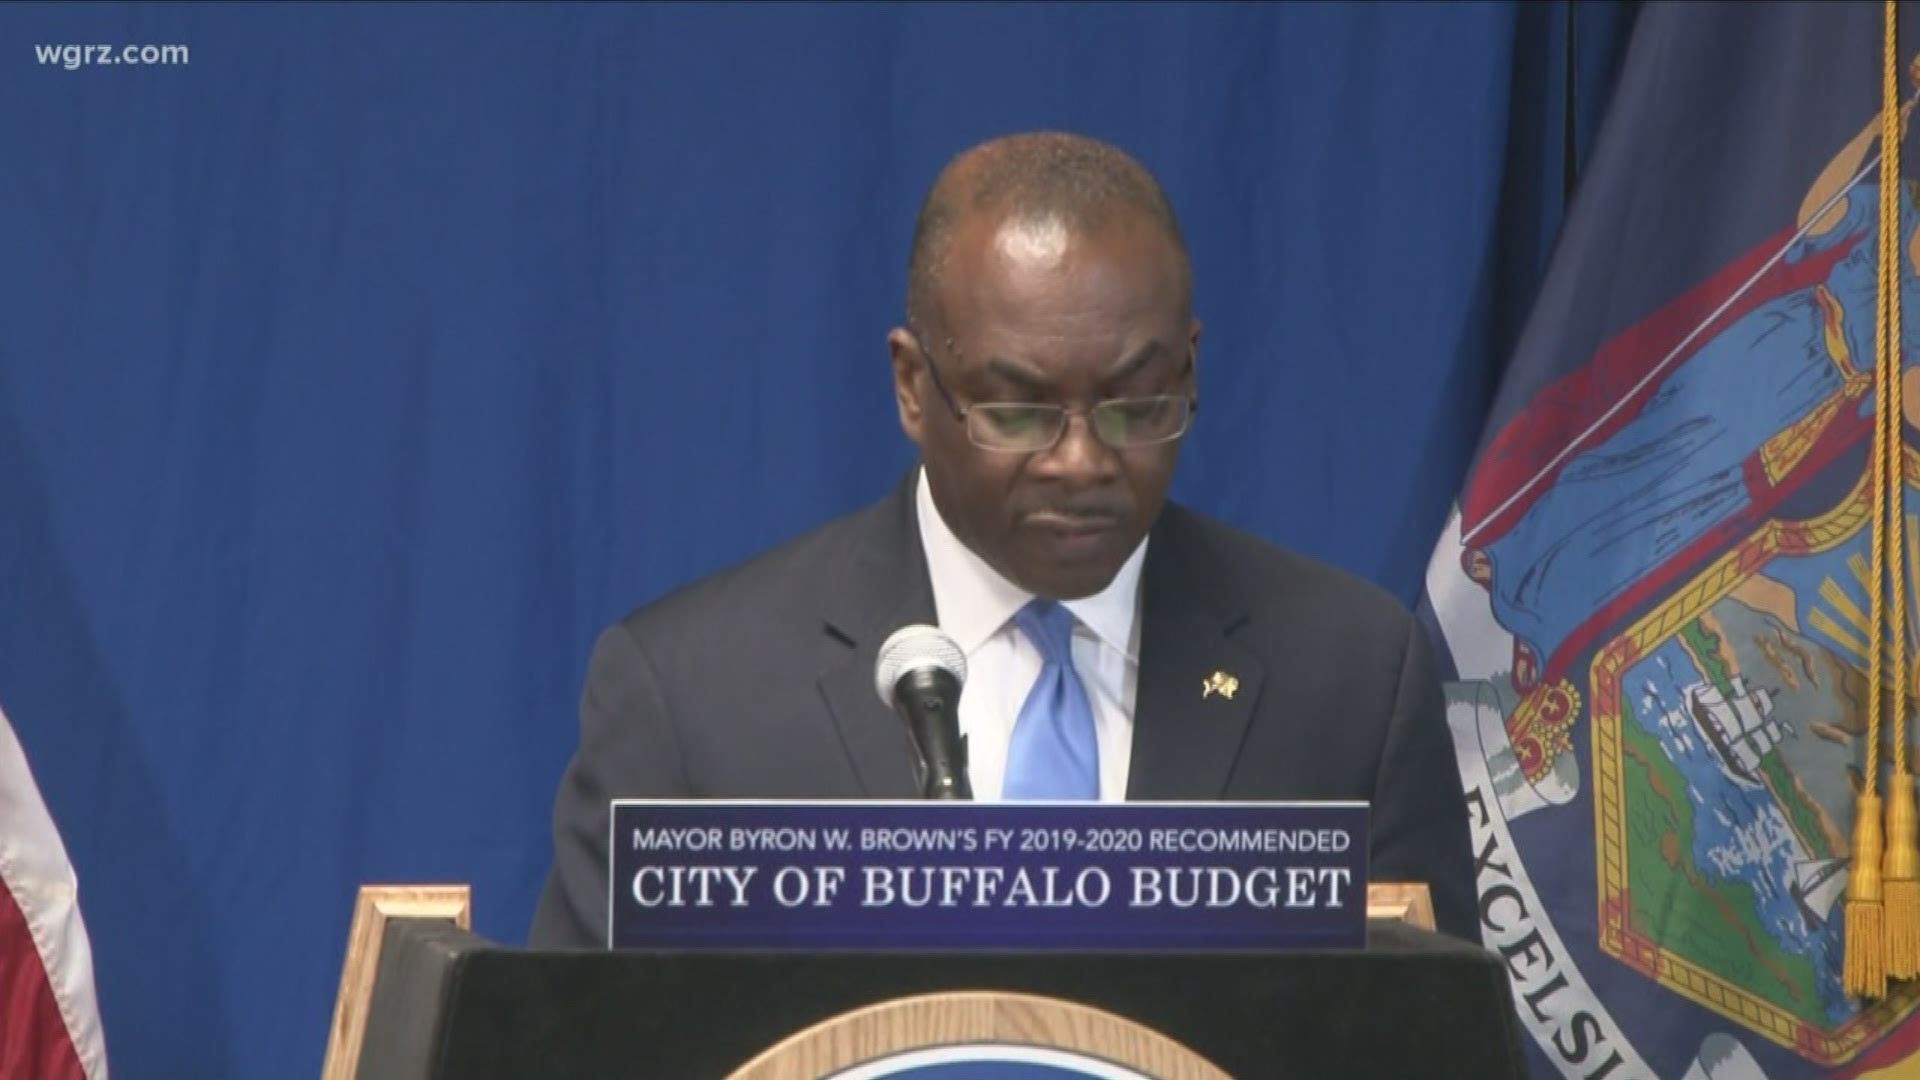 It turns out the financial situation in the City of Buffalo is not as good as city leaders would have you believe.